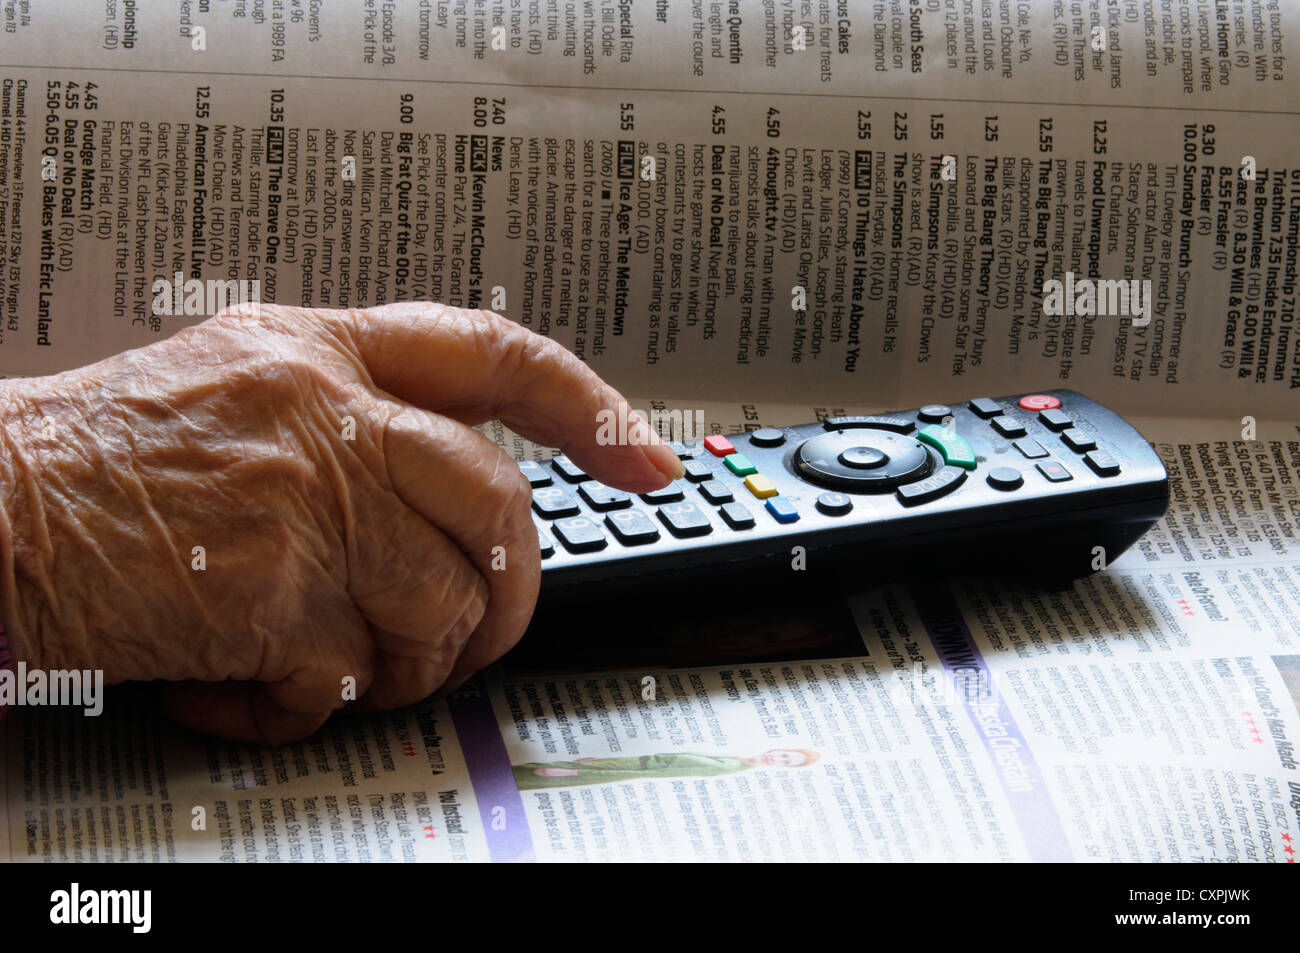 Elderly lady using a television remote control and a TV programme guide.  Senior using current technology. Stock Photo